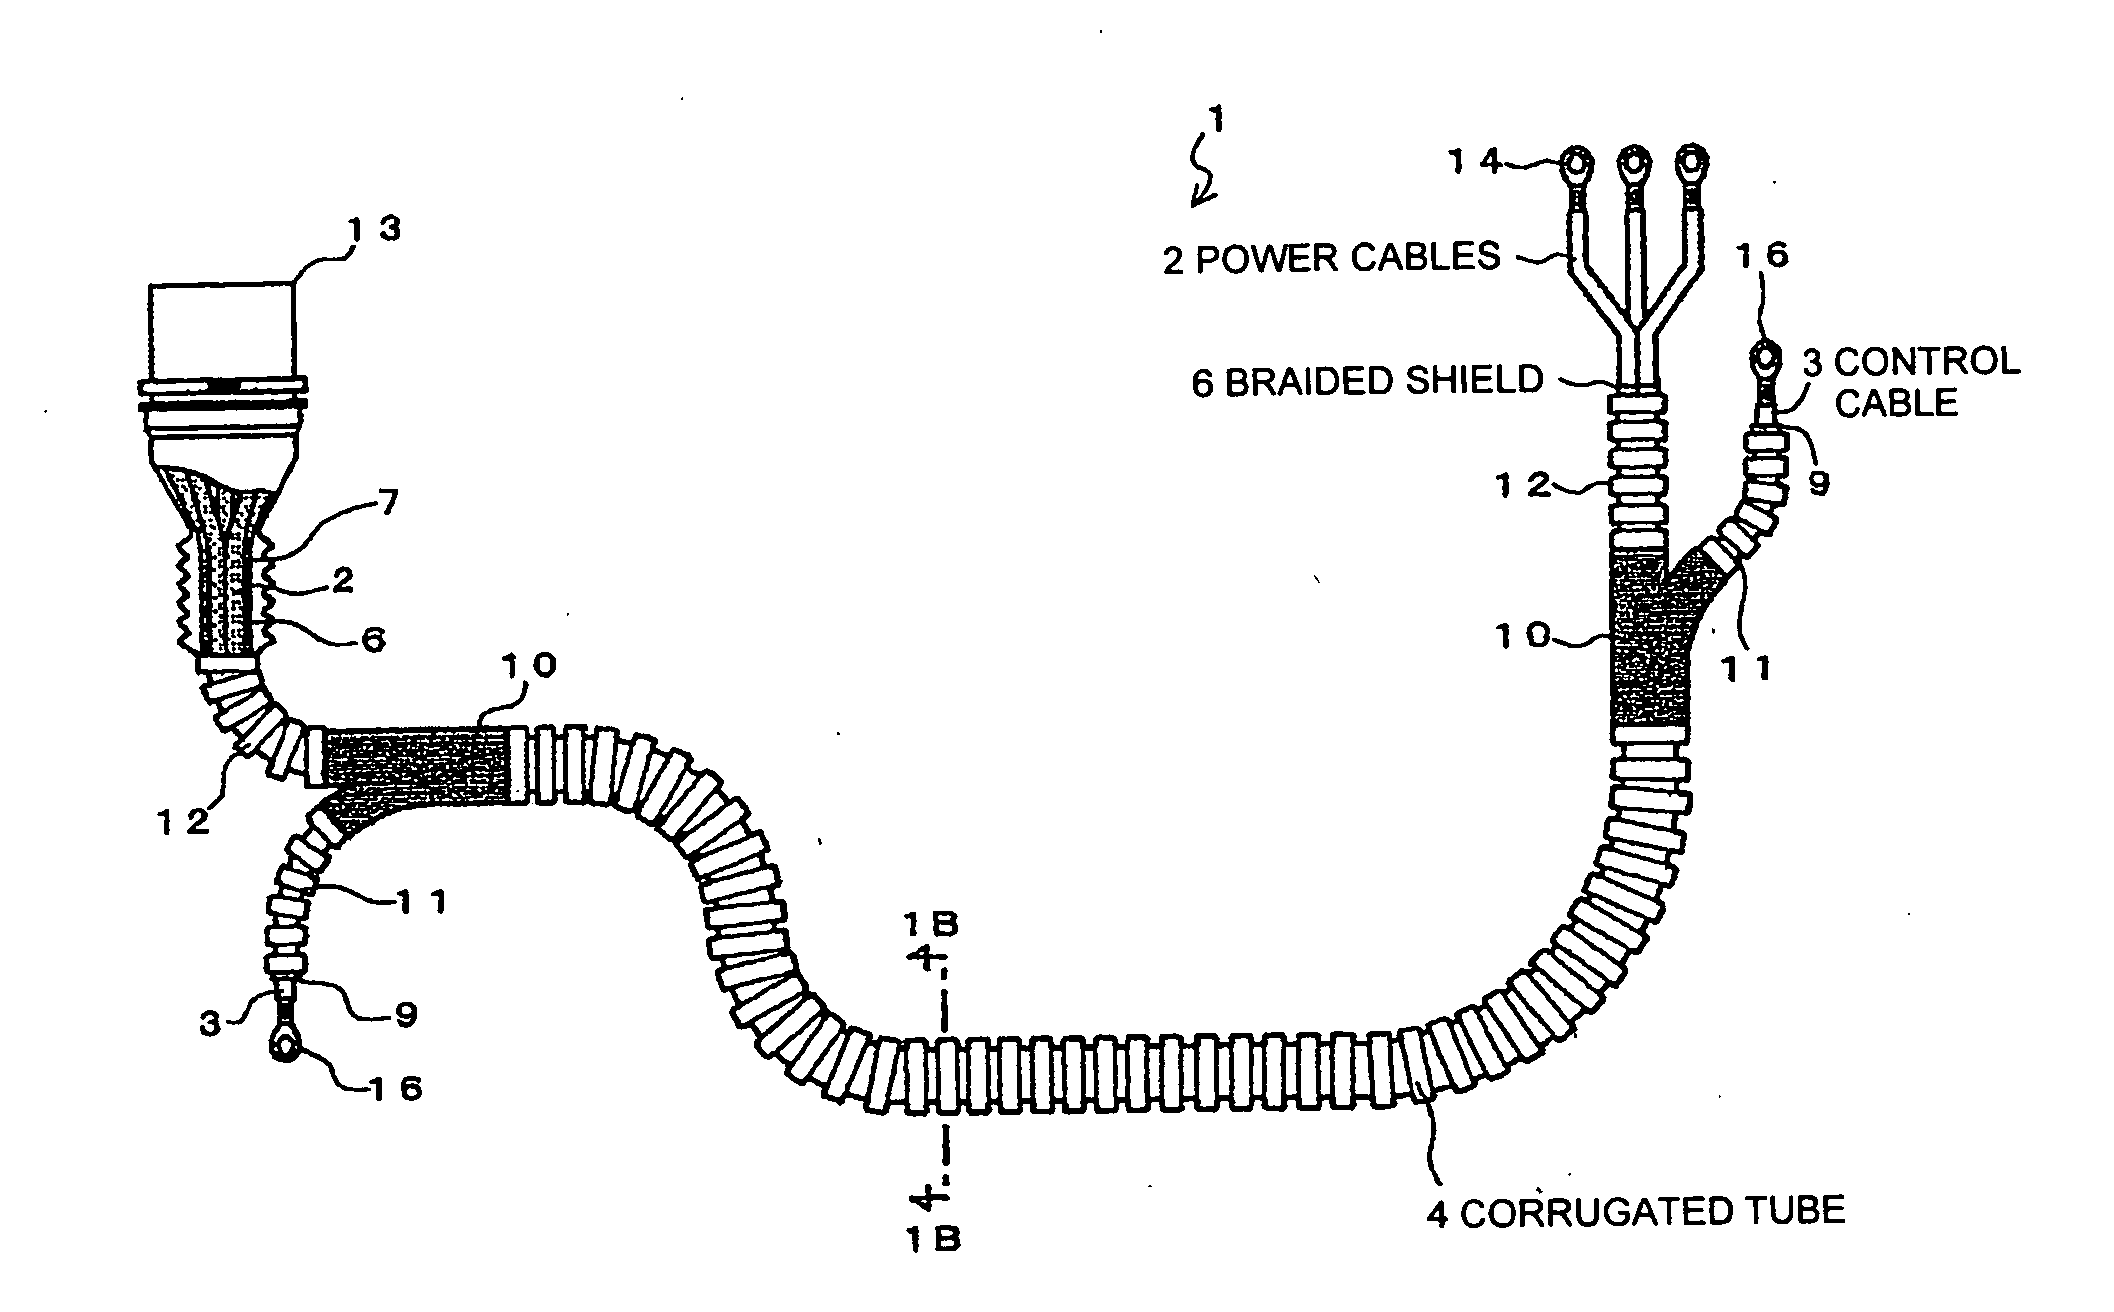 Vehicle electrical conduction path